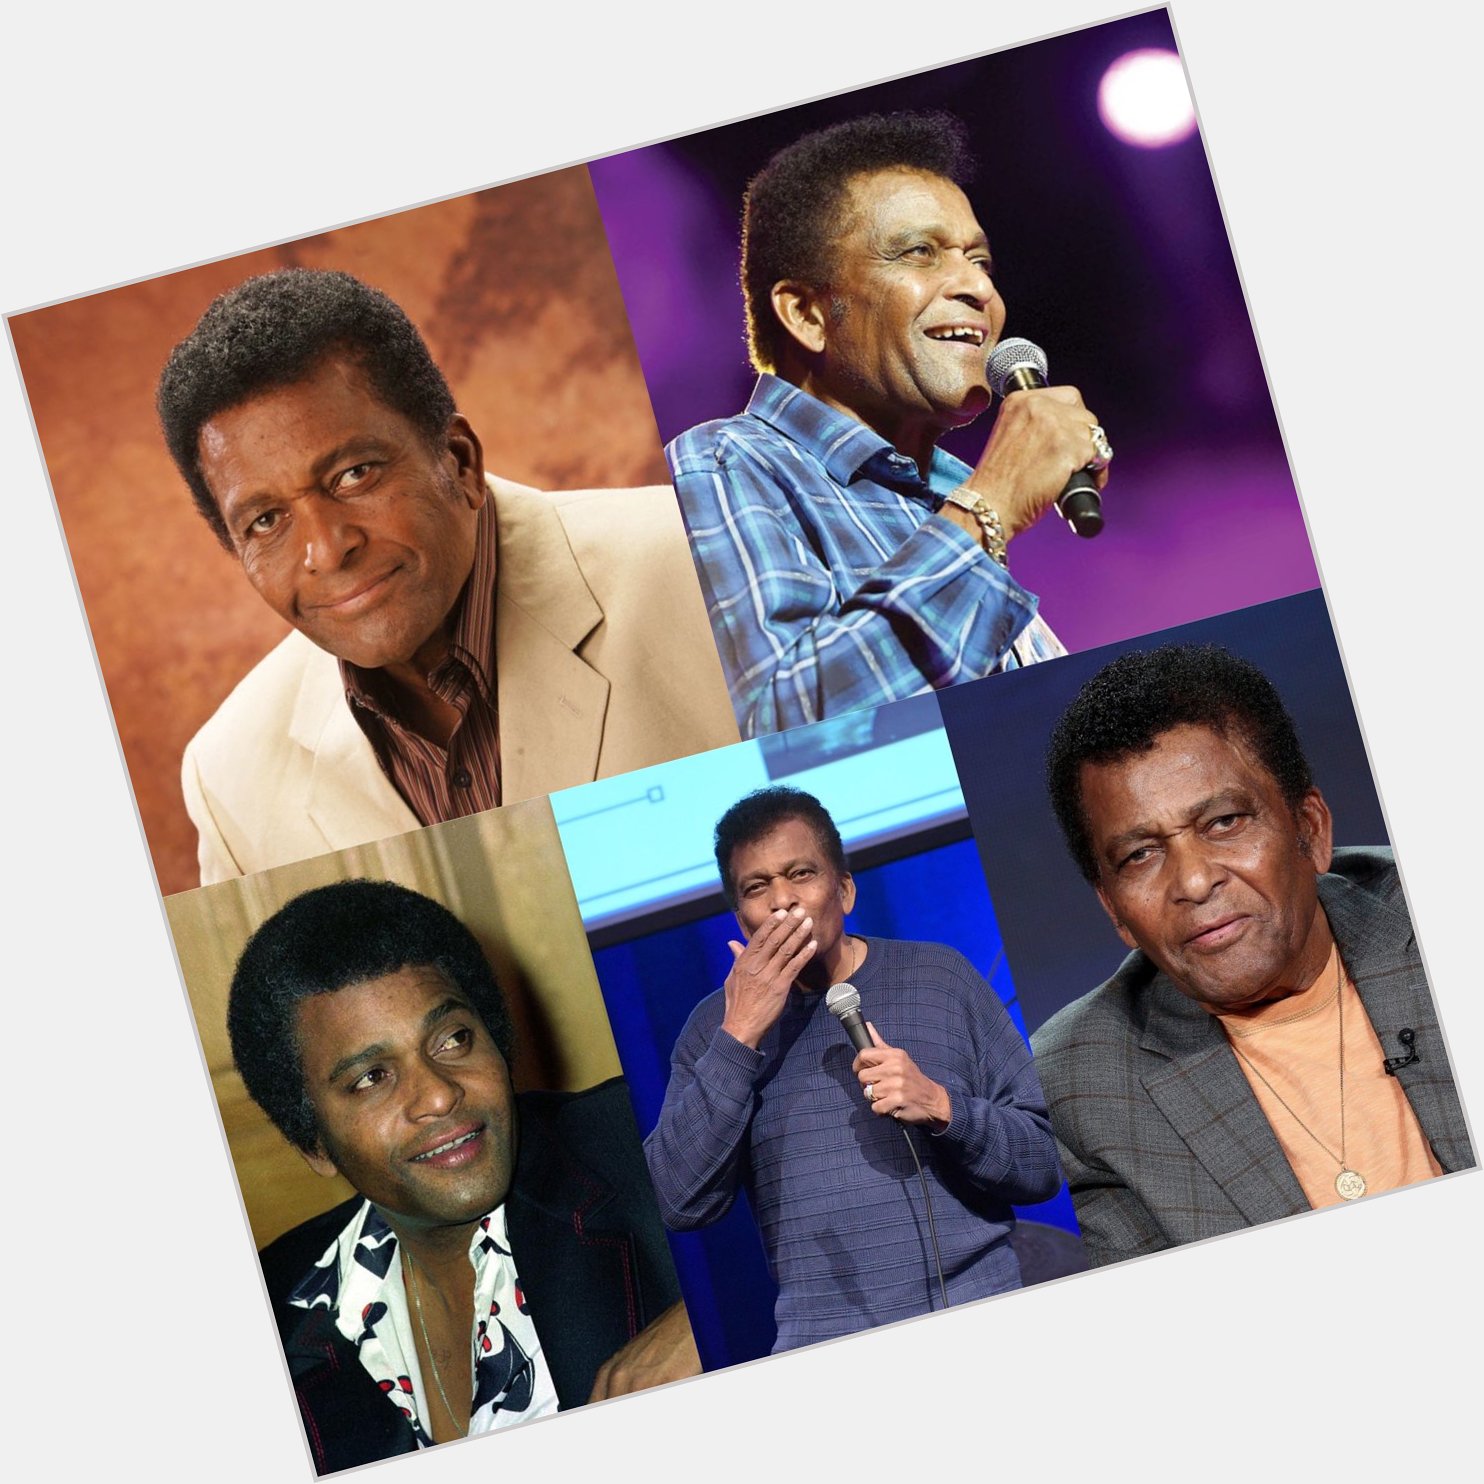 Happy 87 birthday to Charley Pride up in heaven. May the lord bless you and your family.        